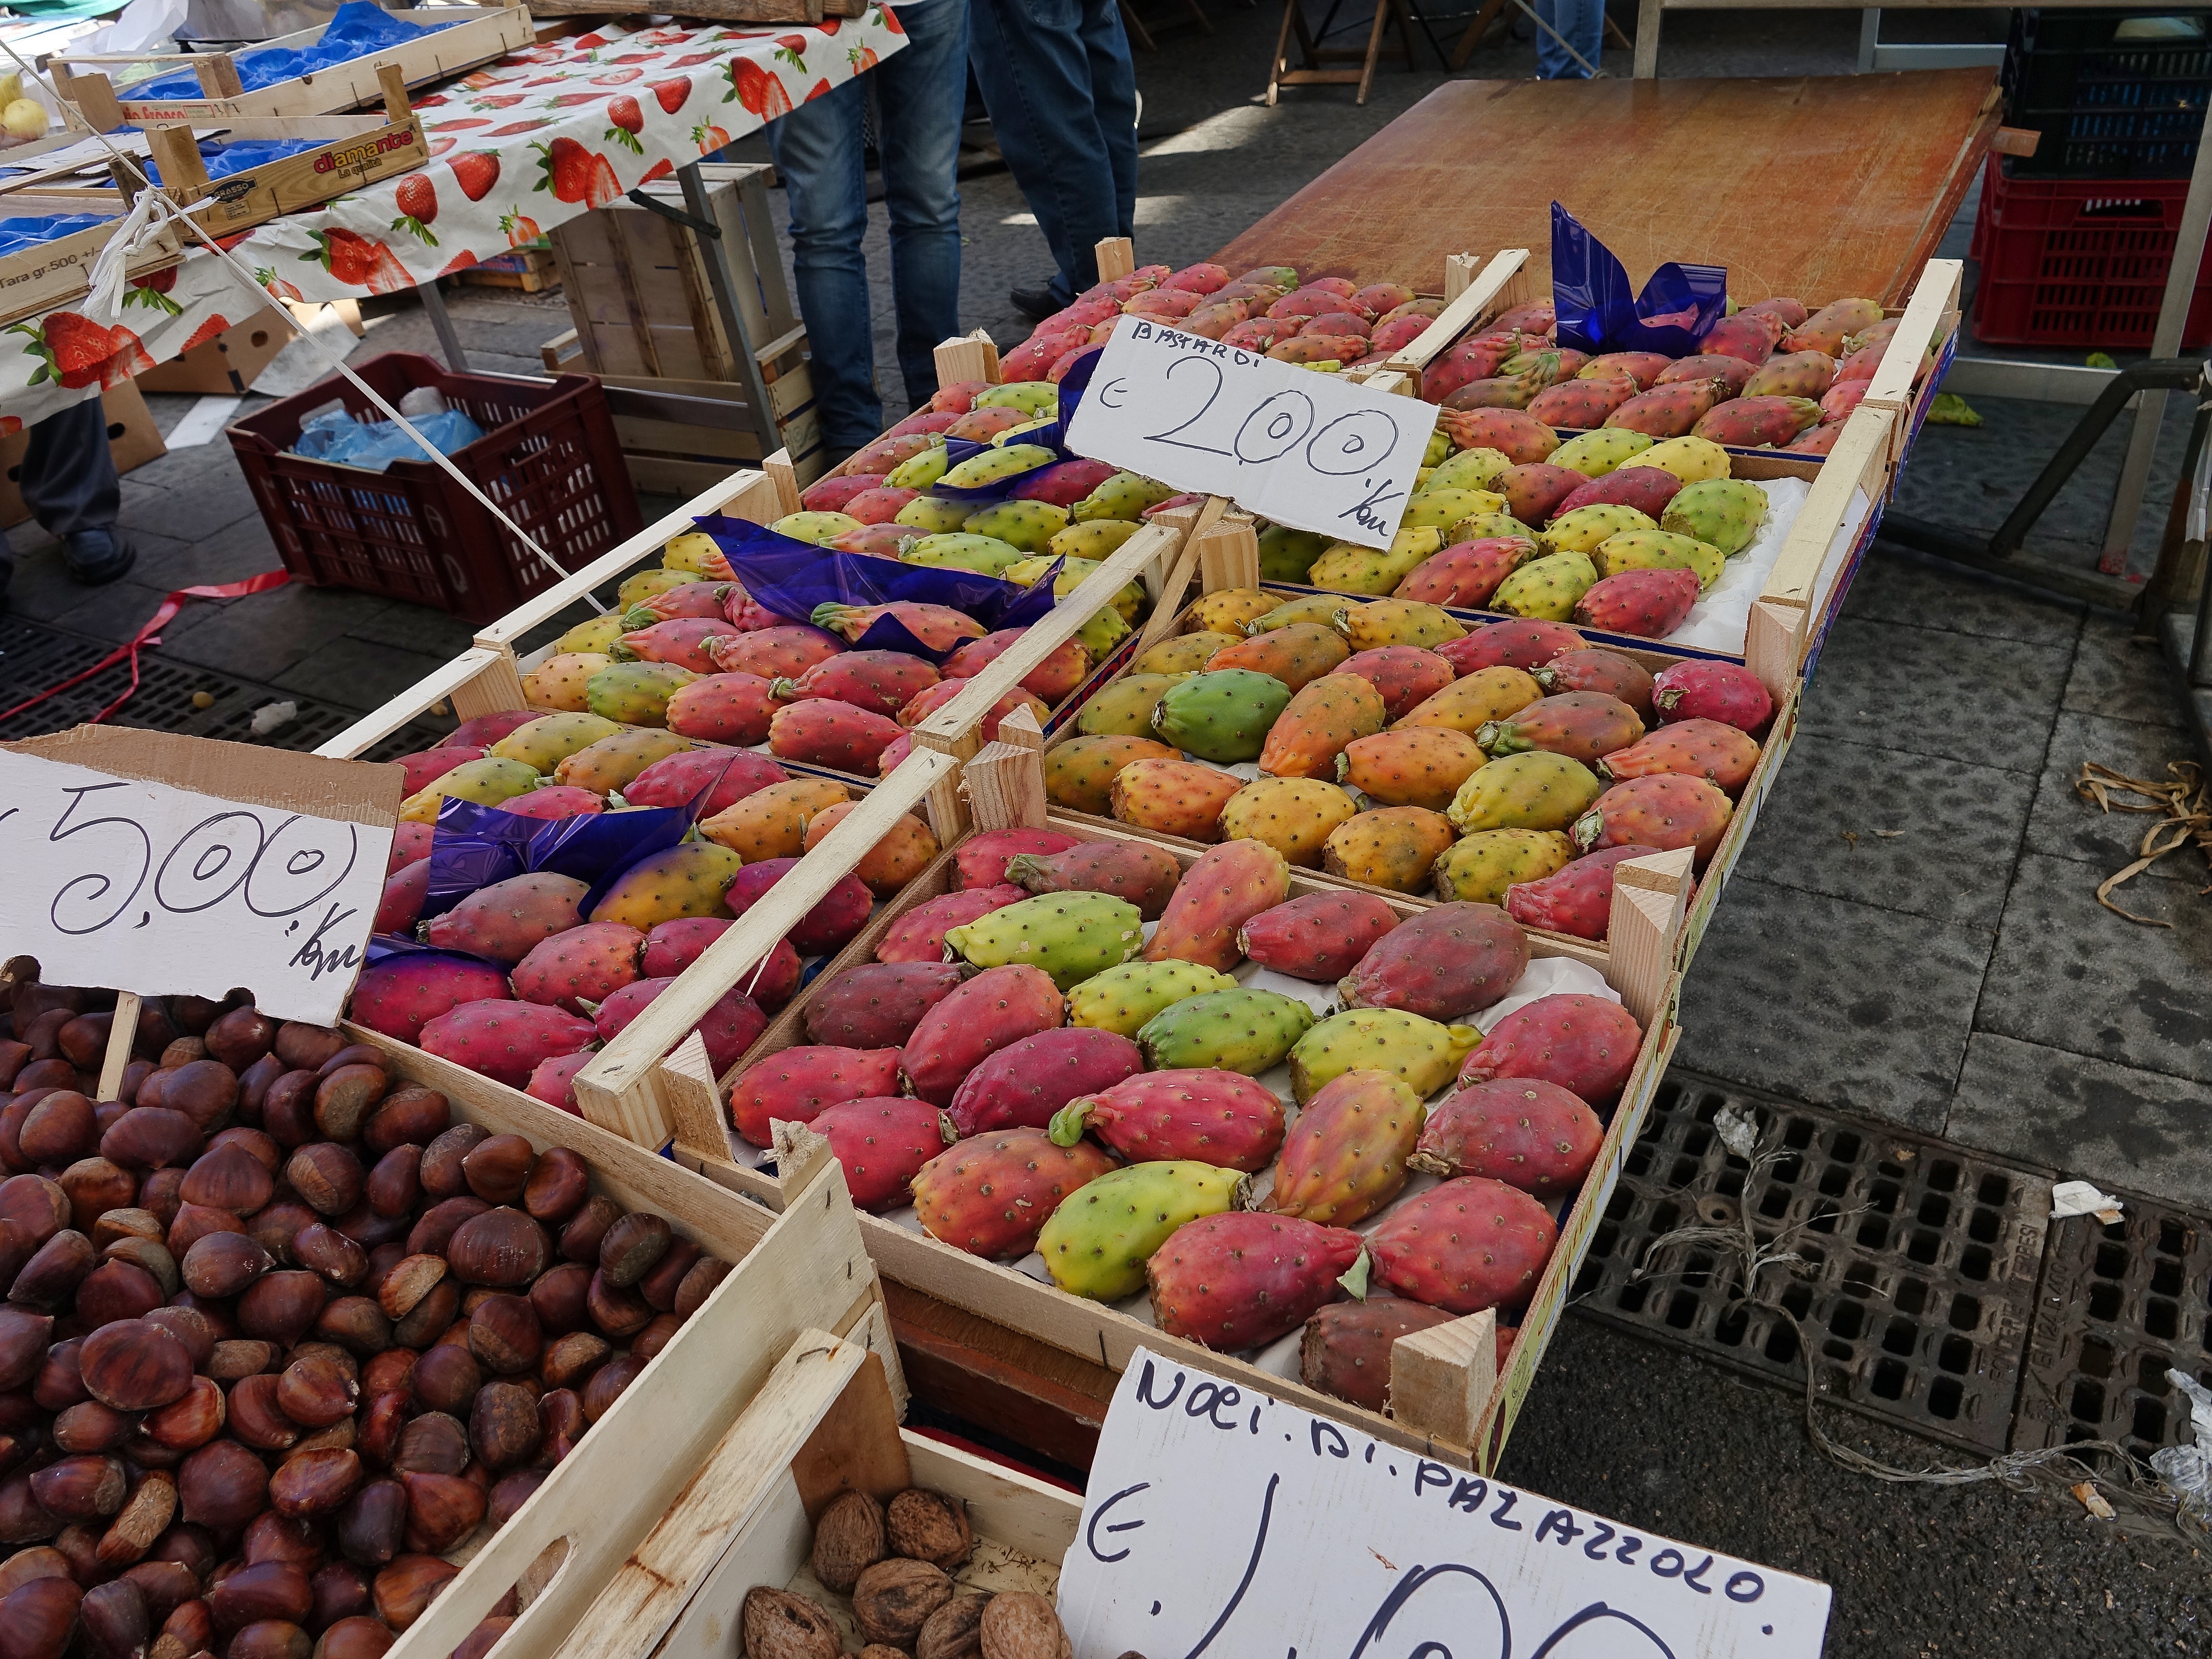 Chestnuts and Prickly pears